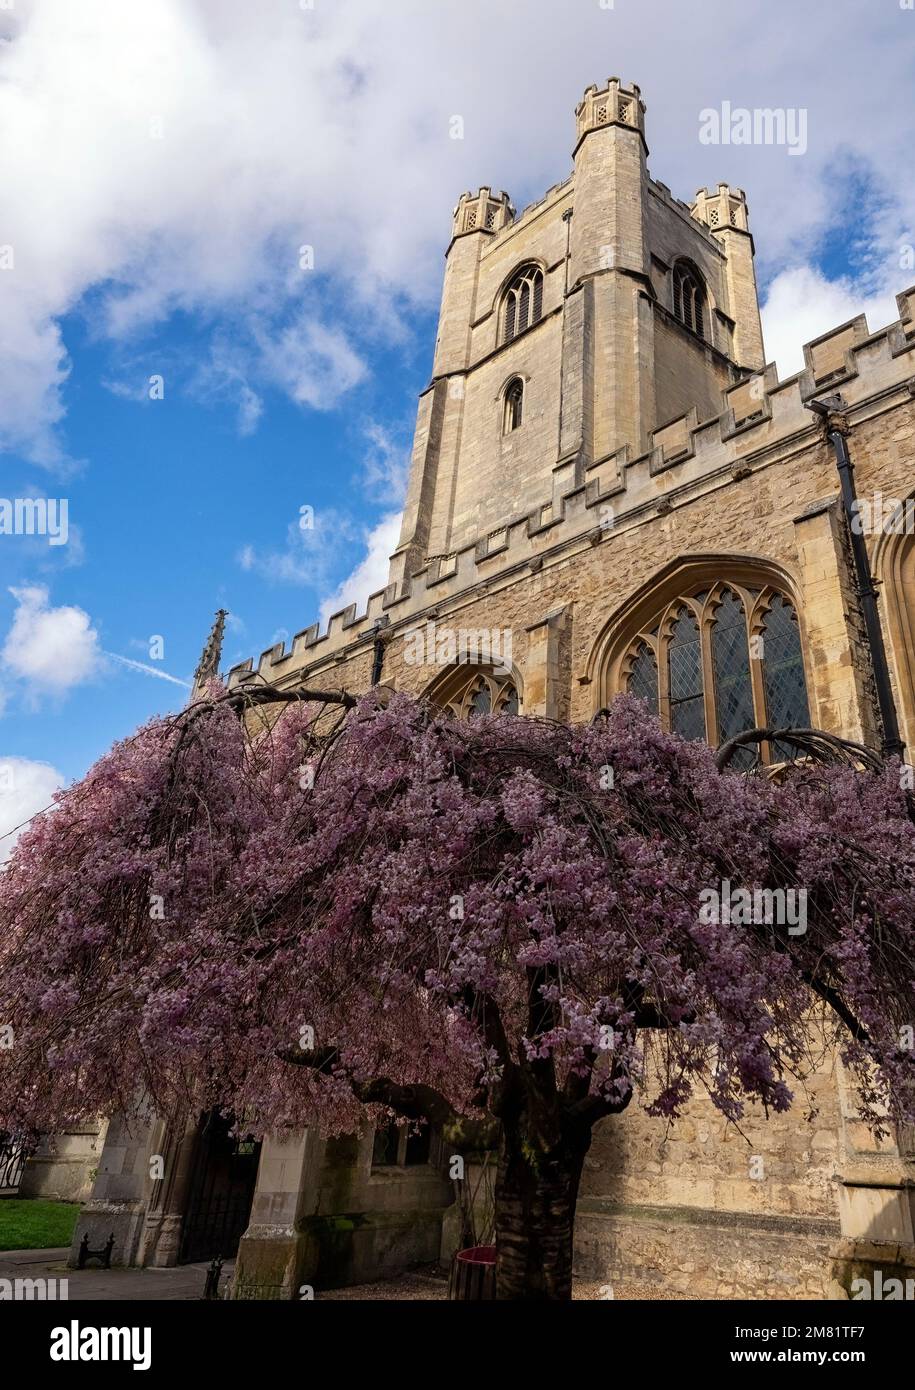 CAMBRIDGE, UK - MARCH 11. 2020:  The tower of the Church of St Mary the Great with spring blossom on tree Stock Photo